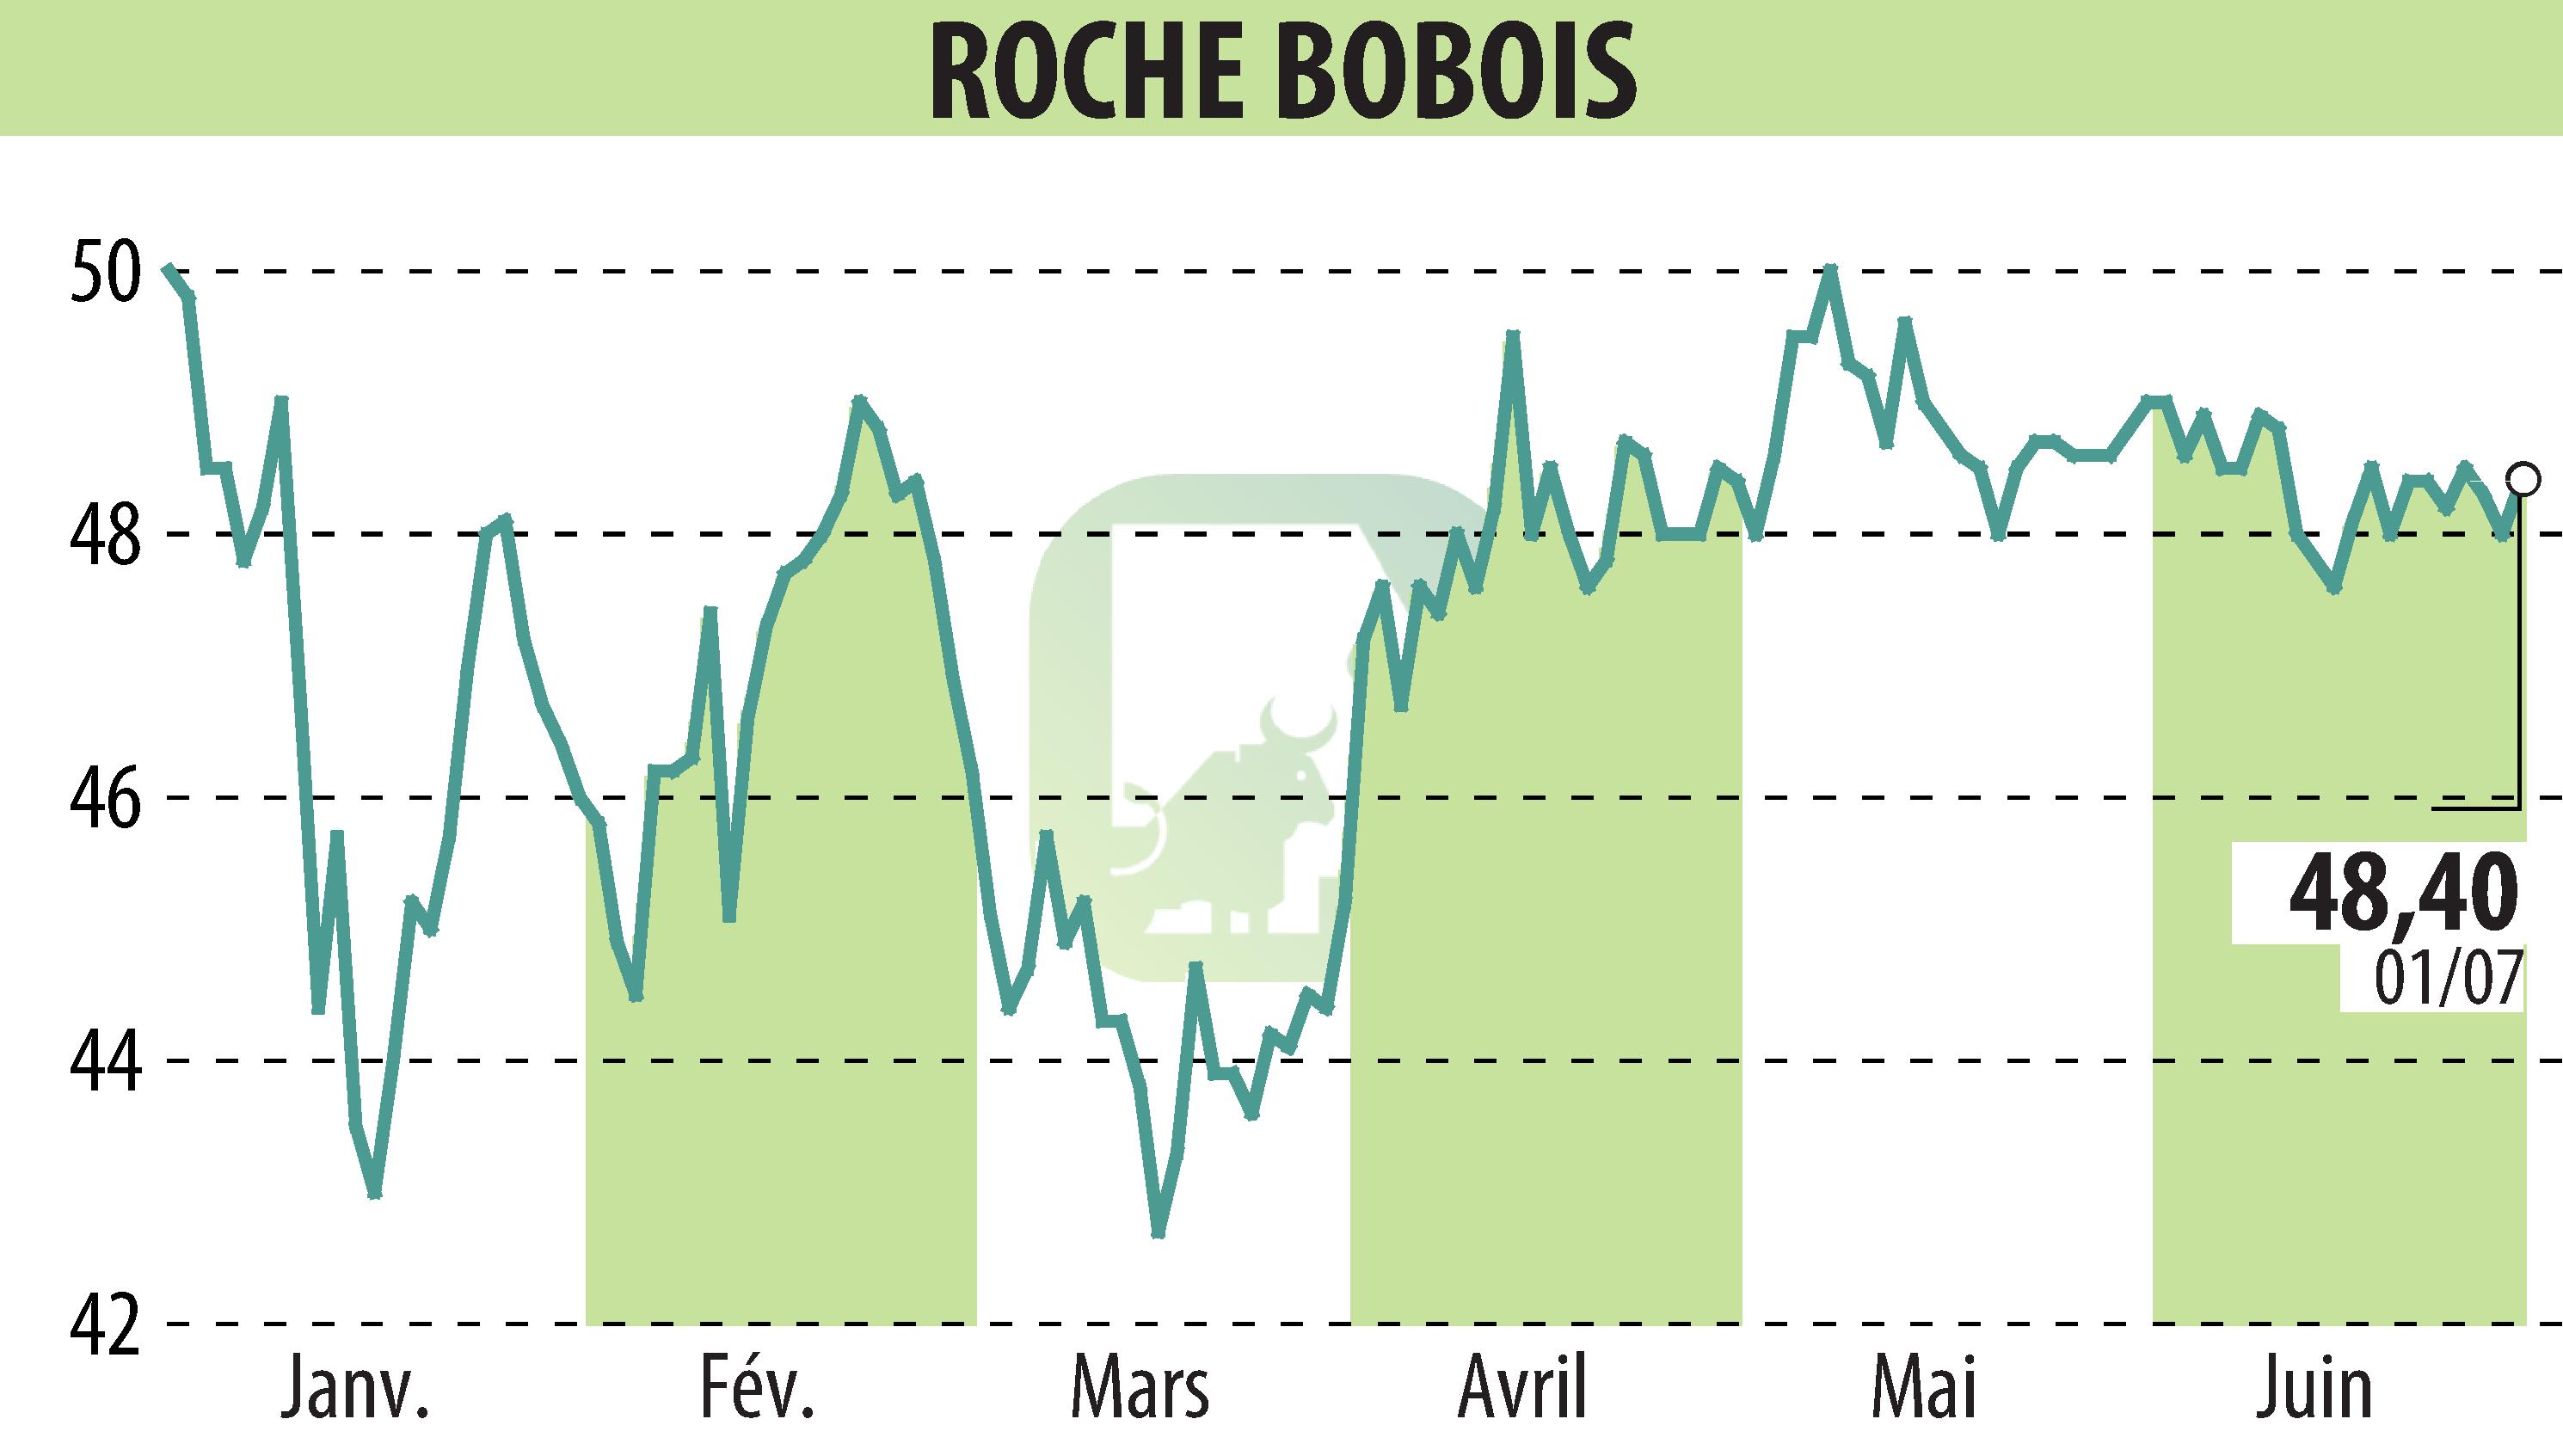 Stock price chart of ROCHE BOBOIS (EPA:RBO) showing fluctuations.